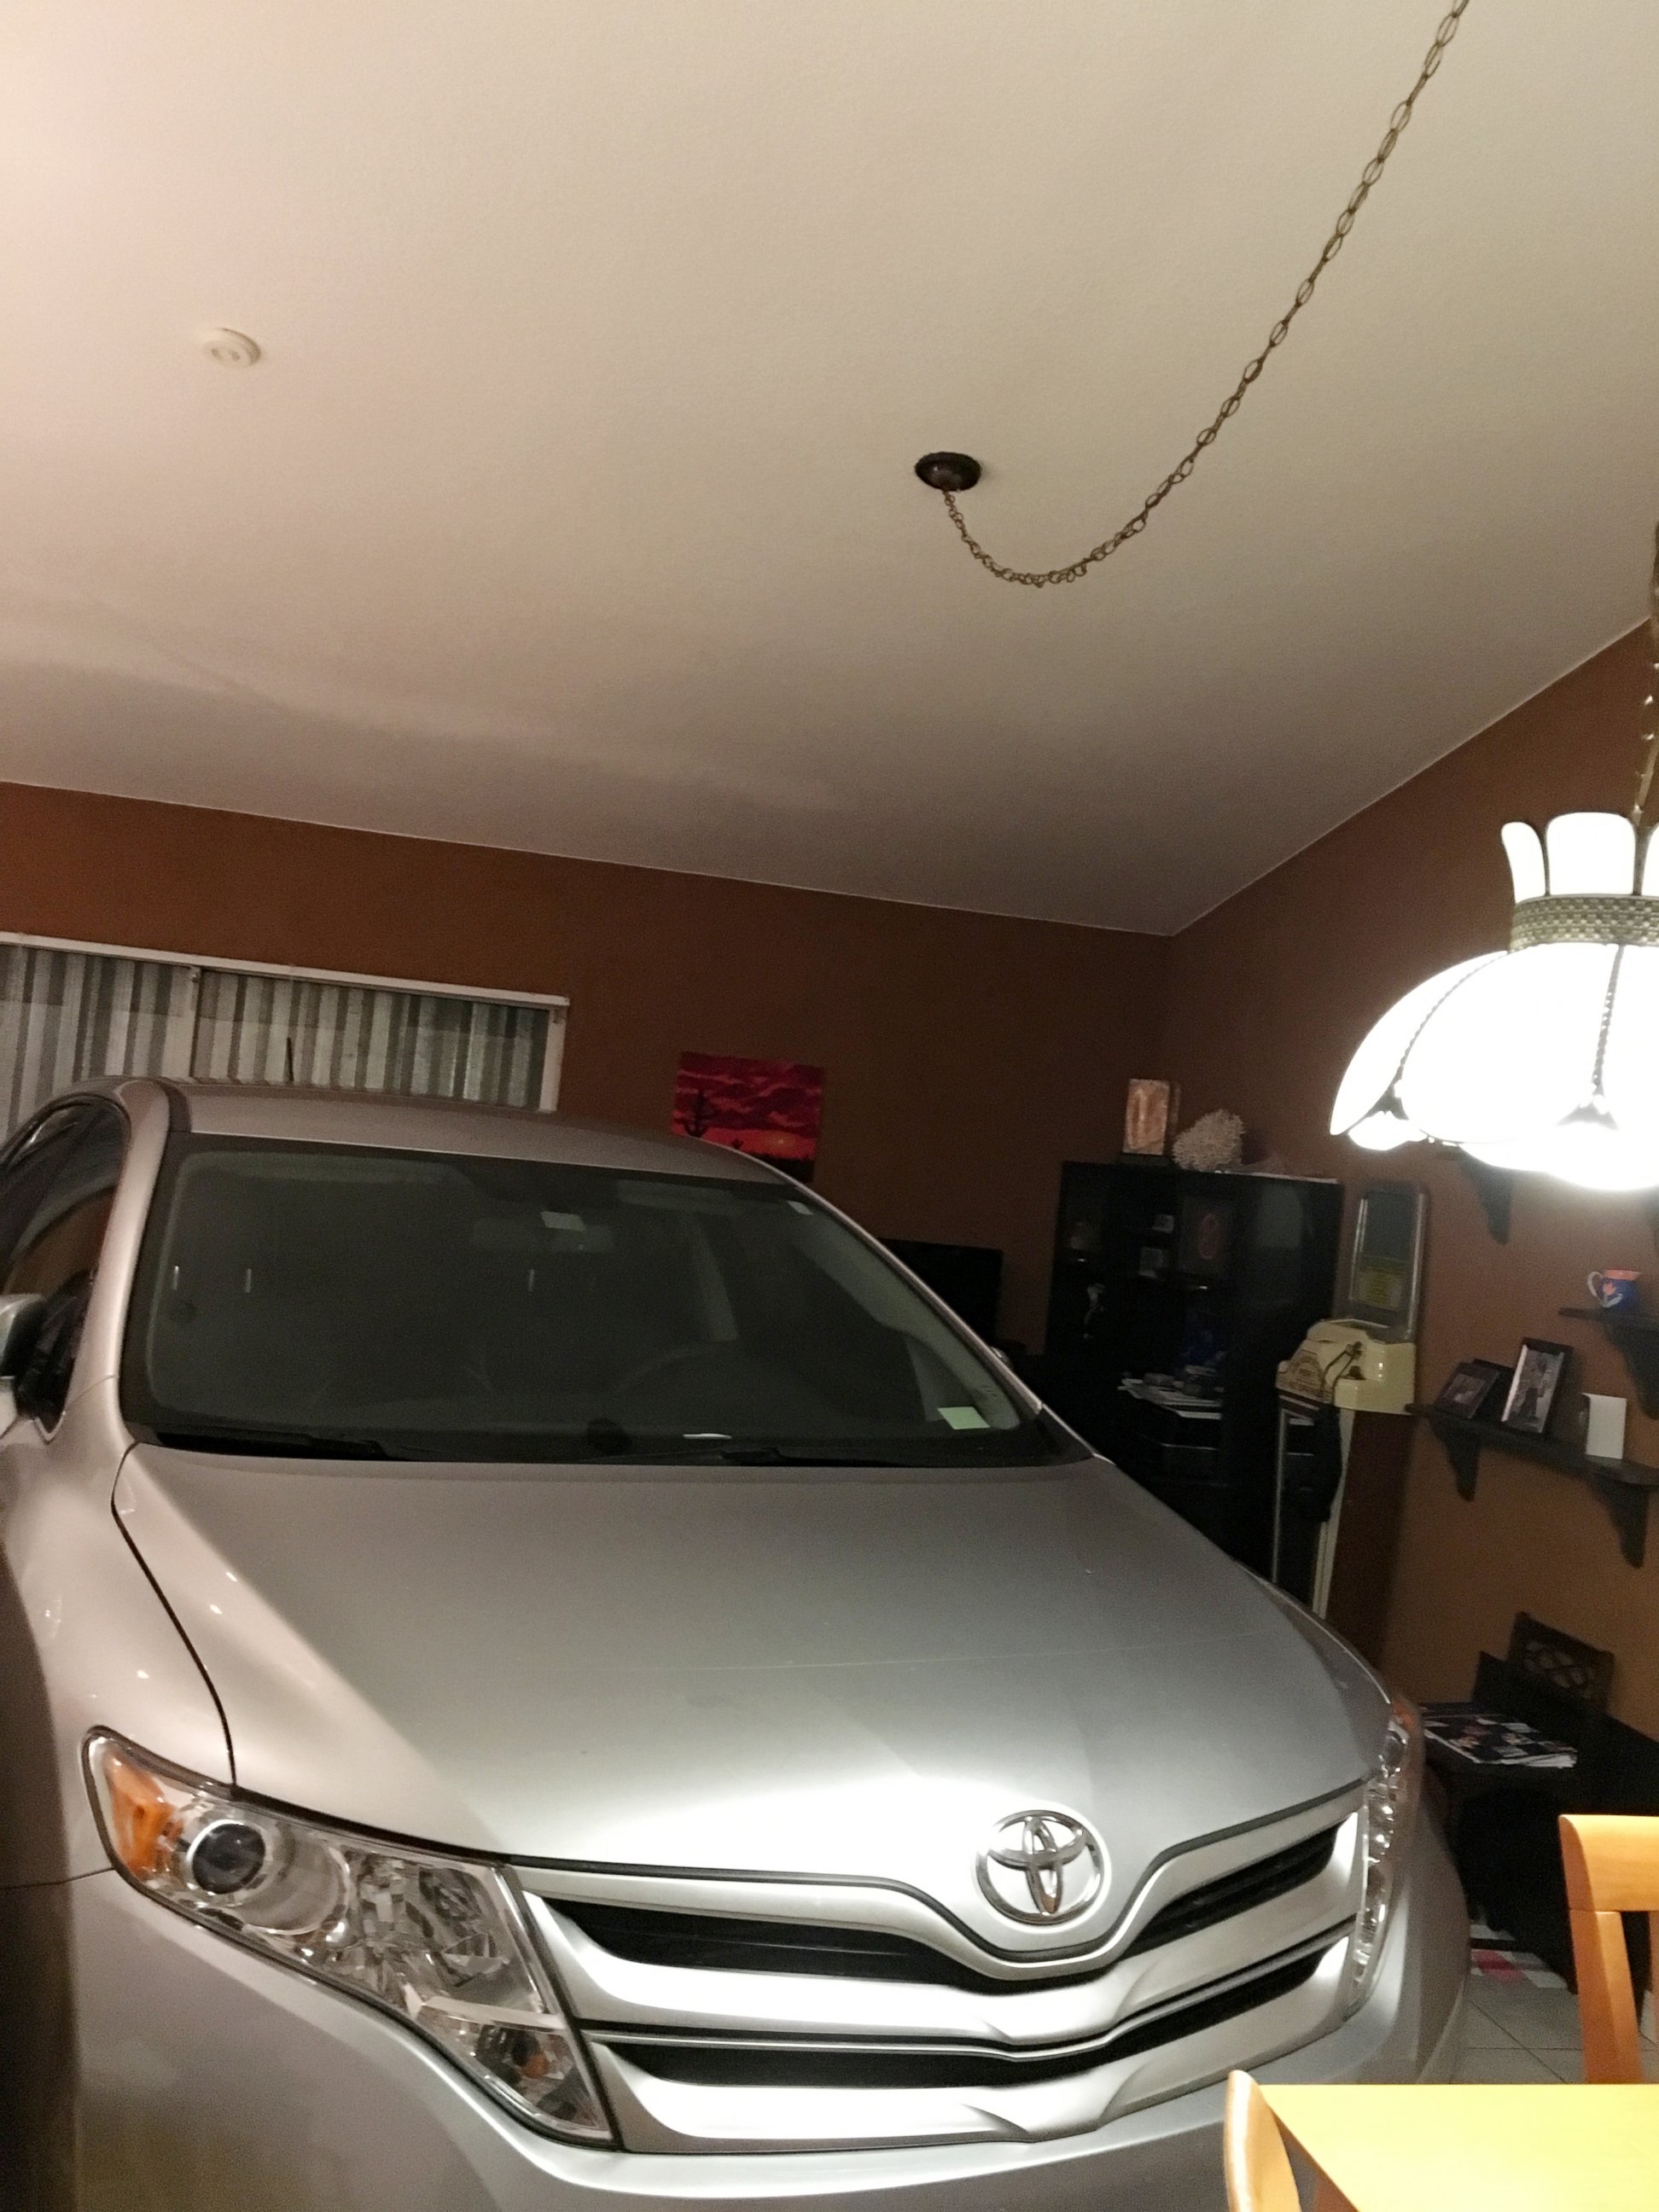 PHOTO: Miami resident Adriana wanted to protect her car from Hurricane Matthew as it approached Florida's coast. But with no room in his one-car garage, Adriana's fiance decided to put her car in the living room, Oct. 6, 2016.